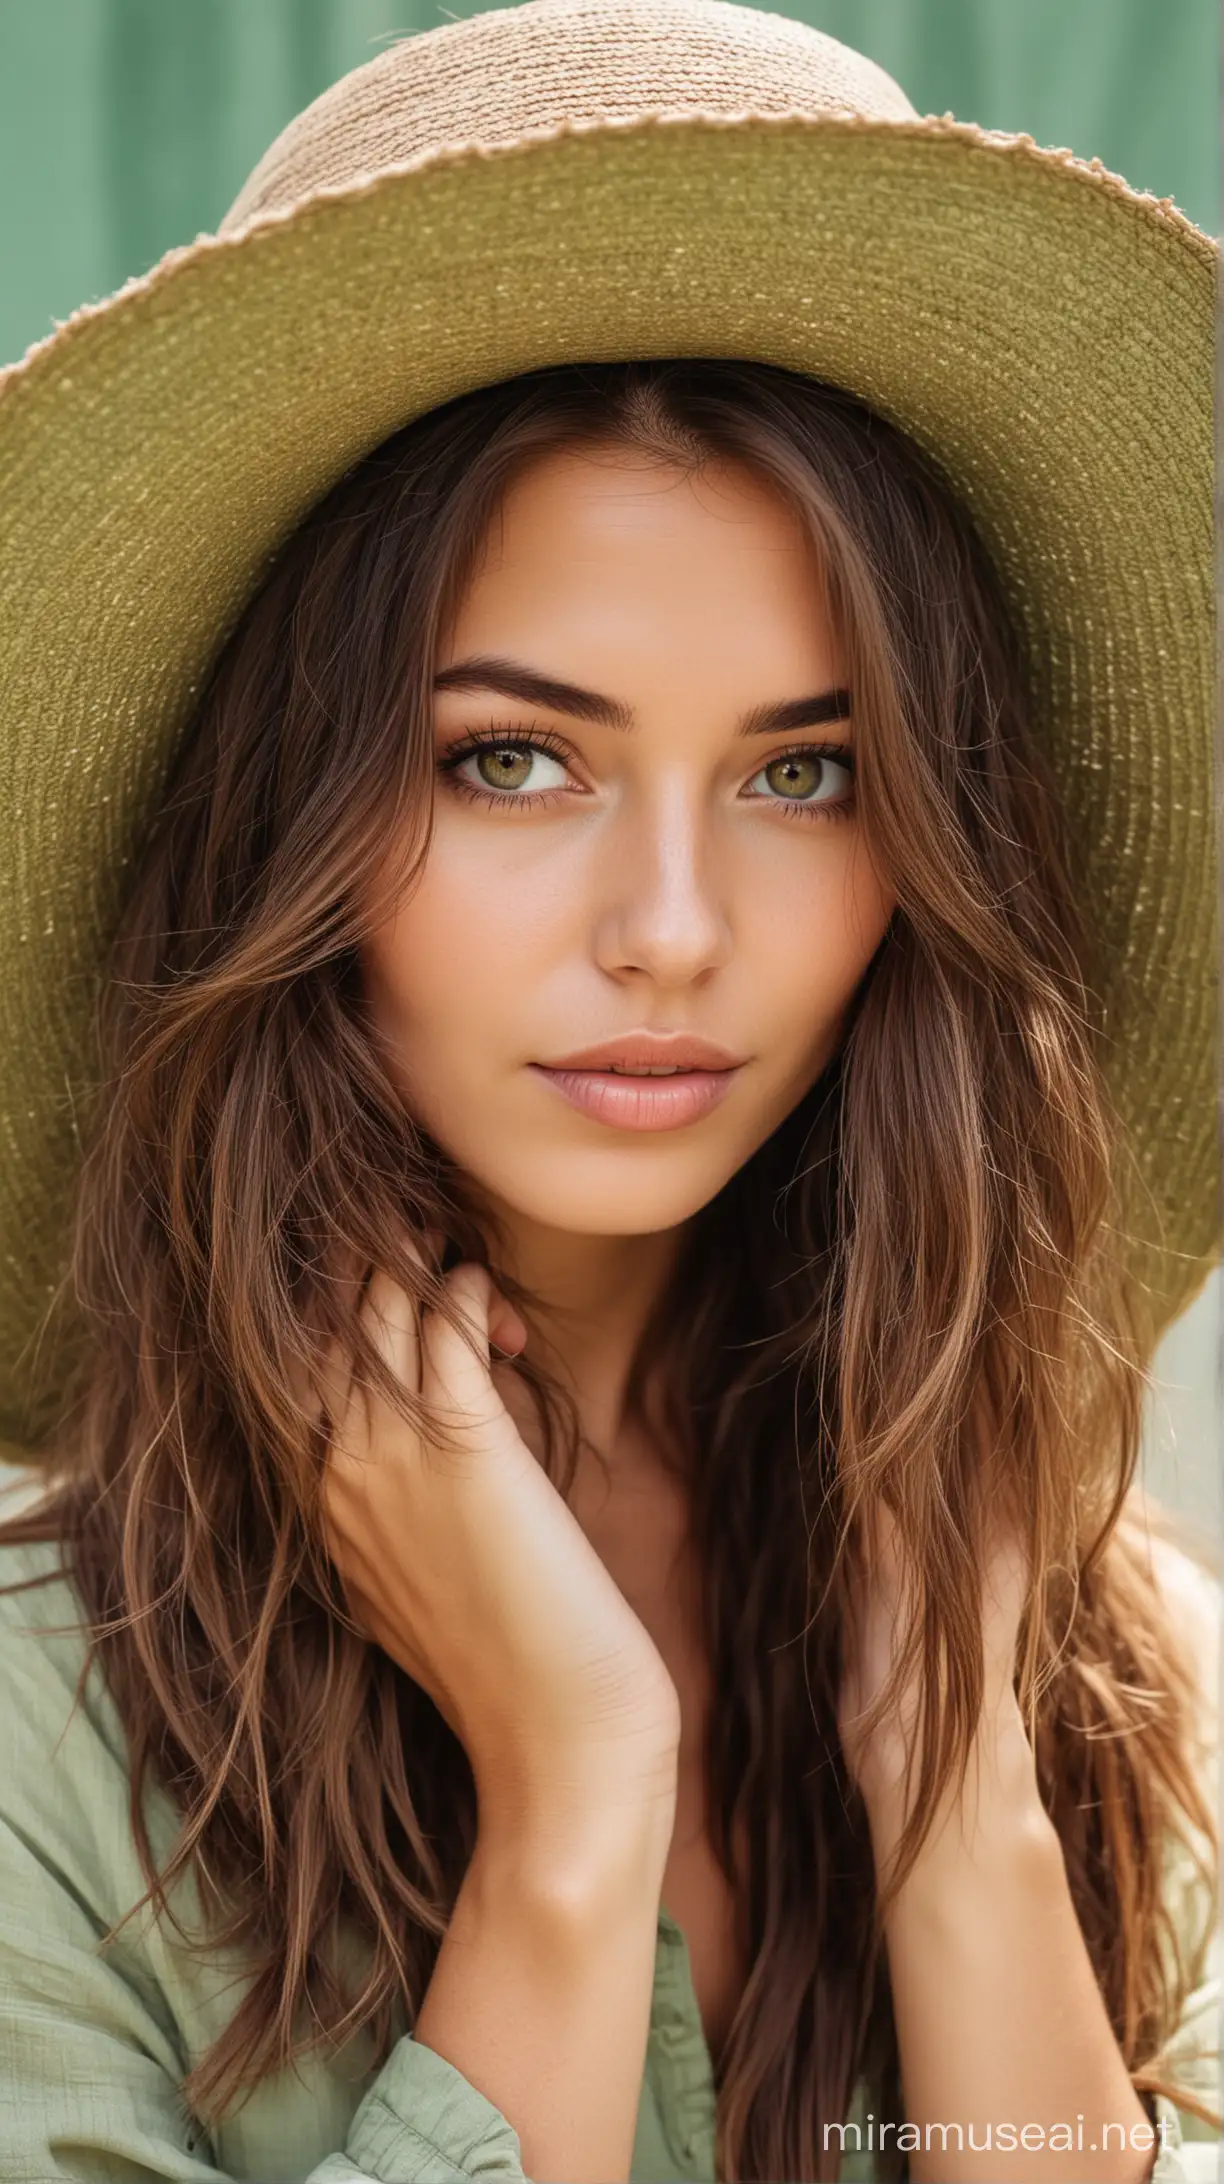 Boho Style Woman with Straw Hat in Natural Setting